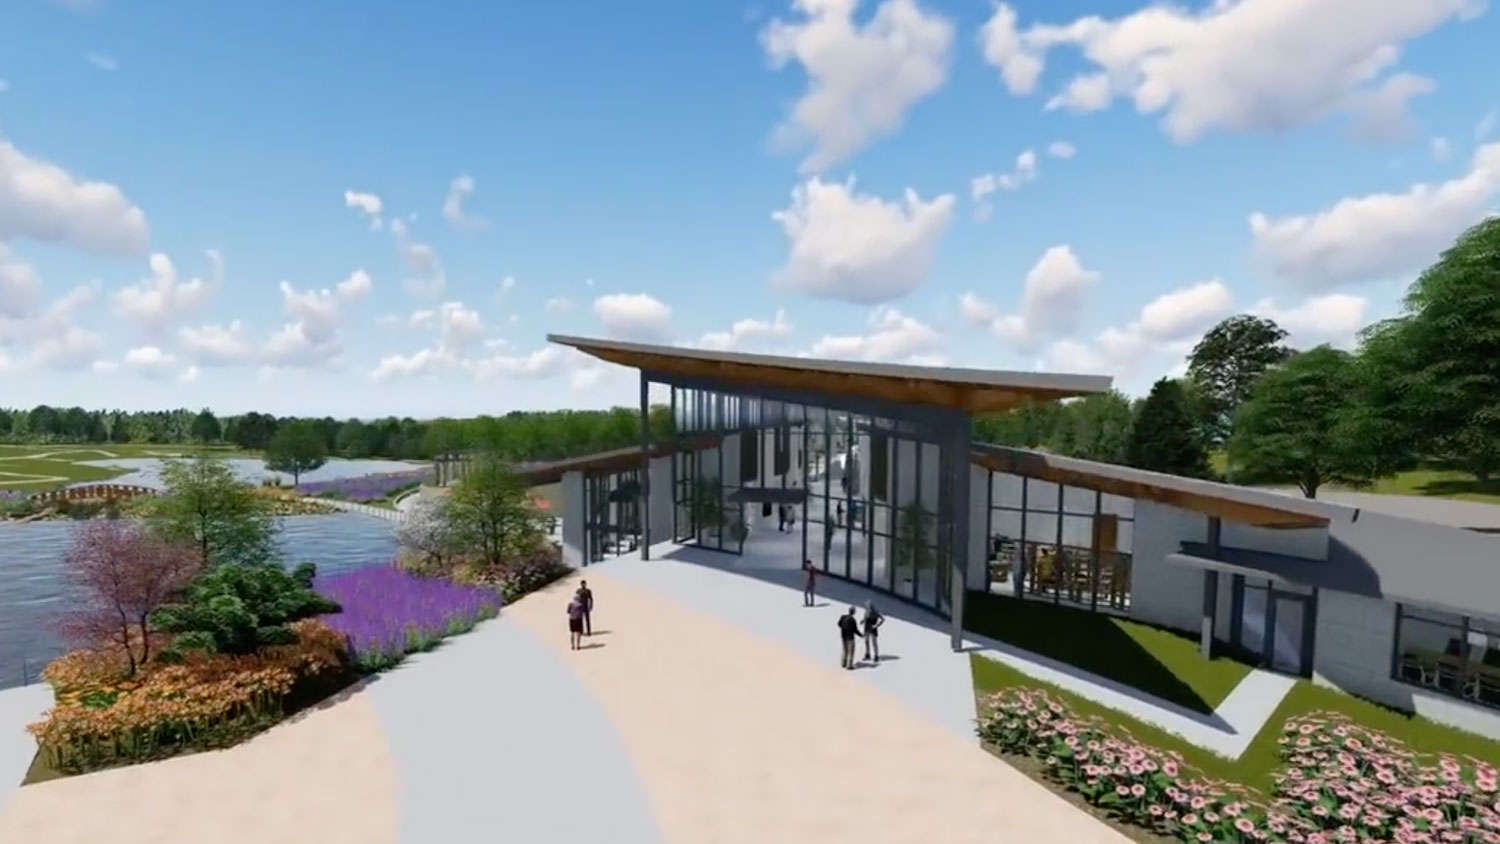 A rendering of the Overland Park Arboretum Visitors Center, a McCownGordon Construction project